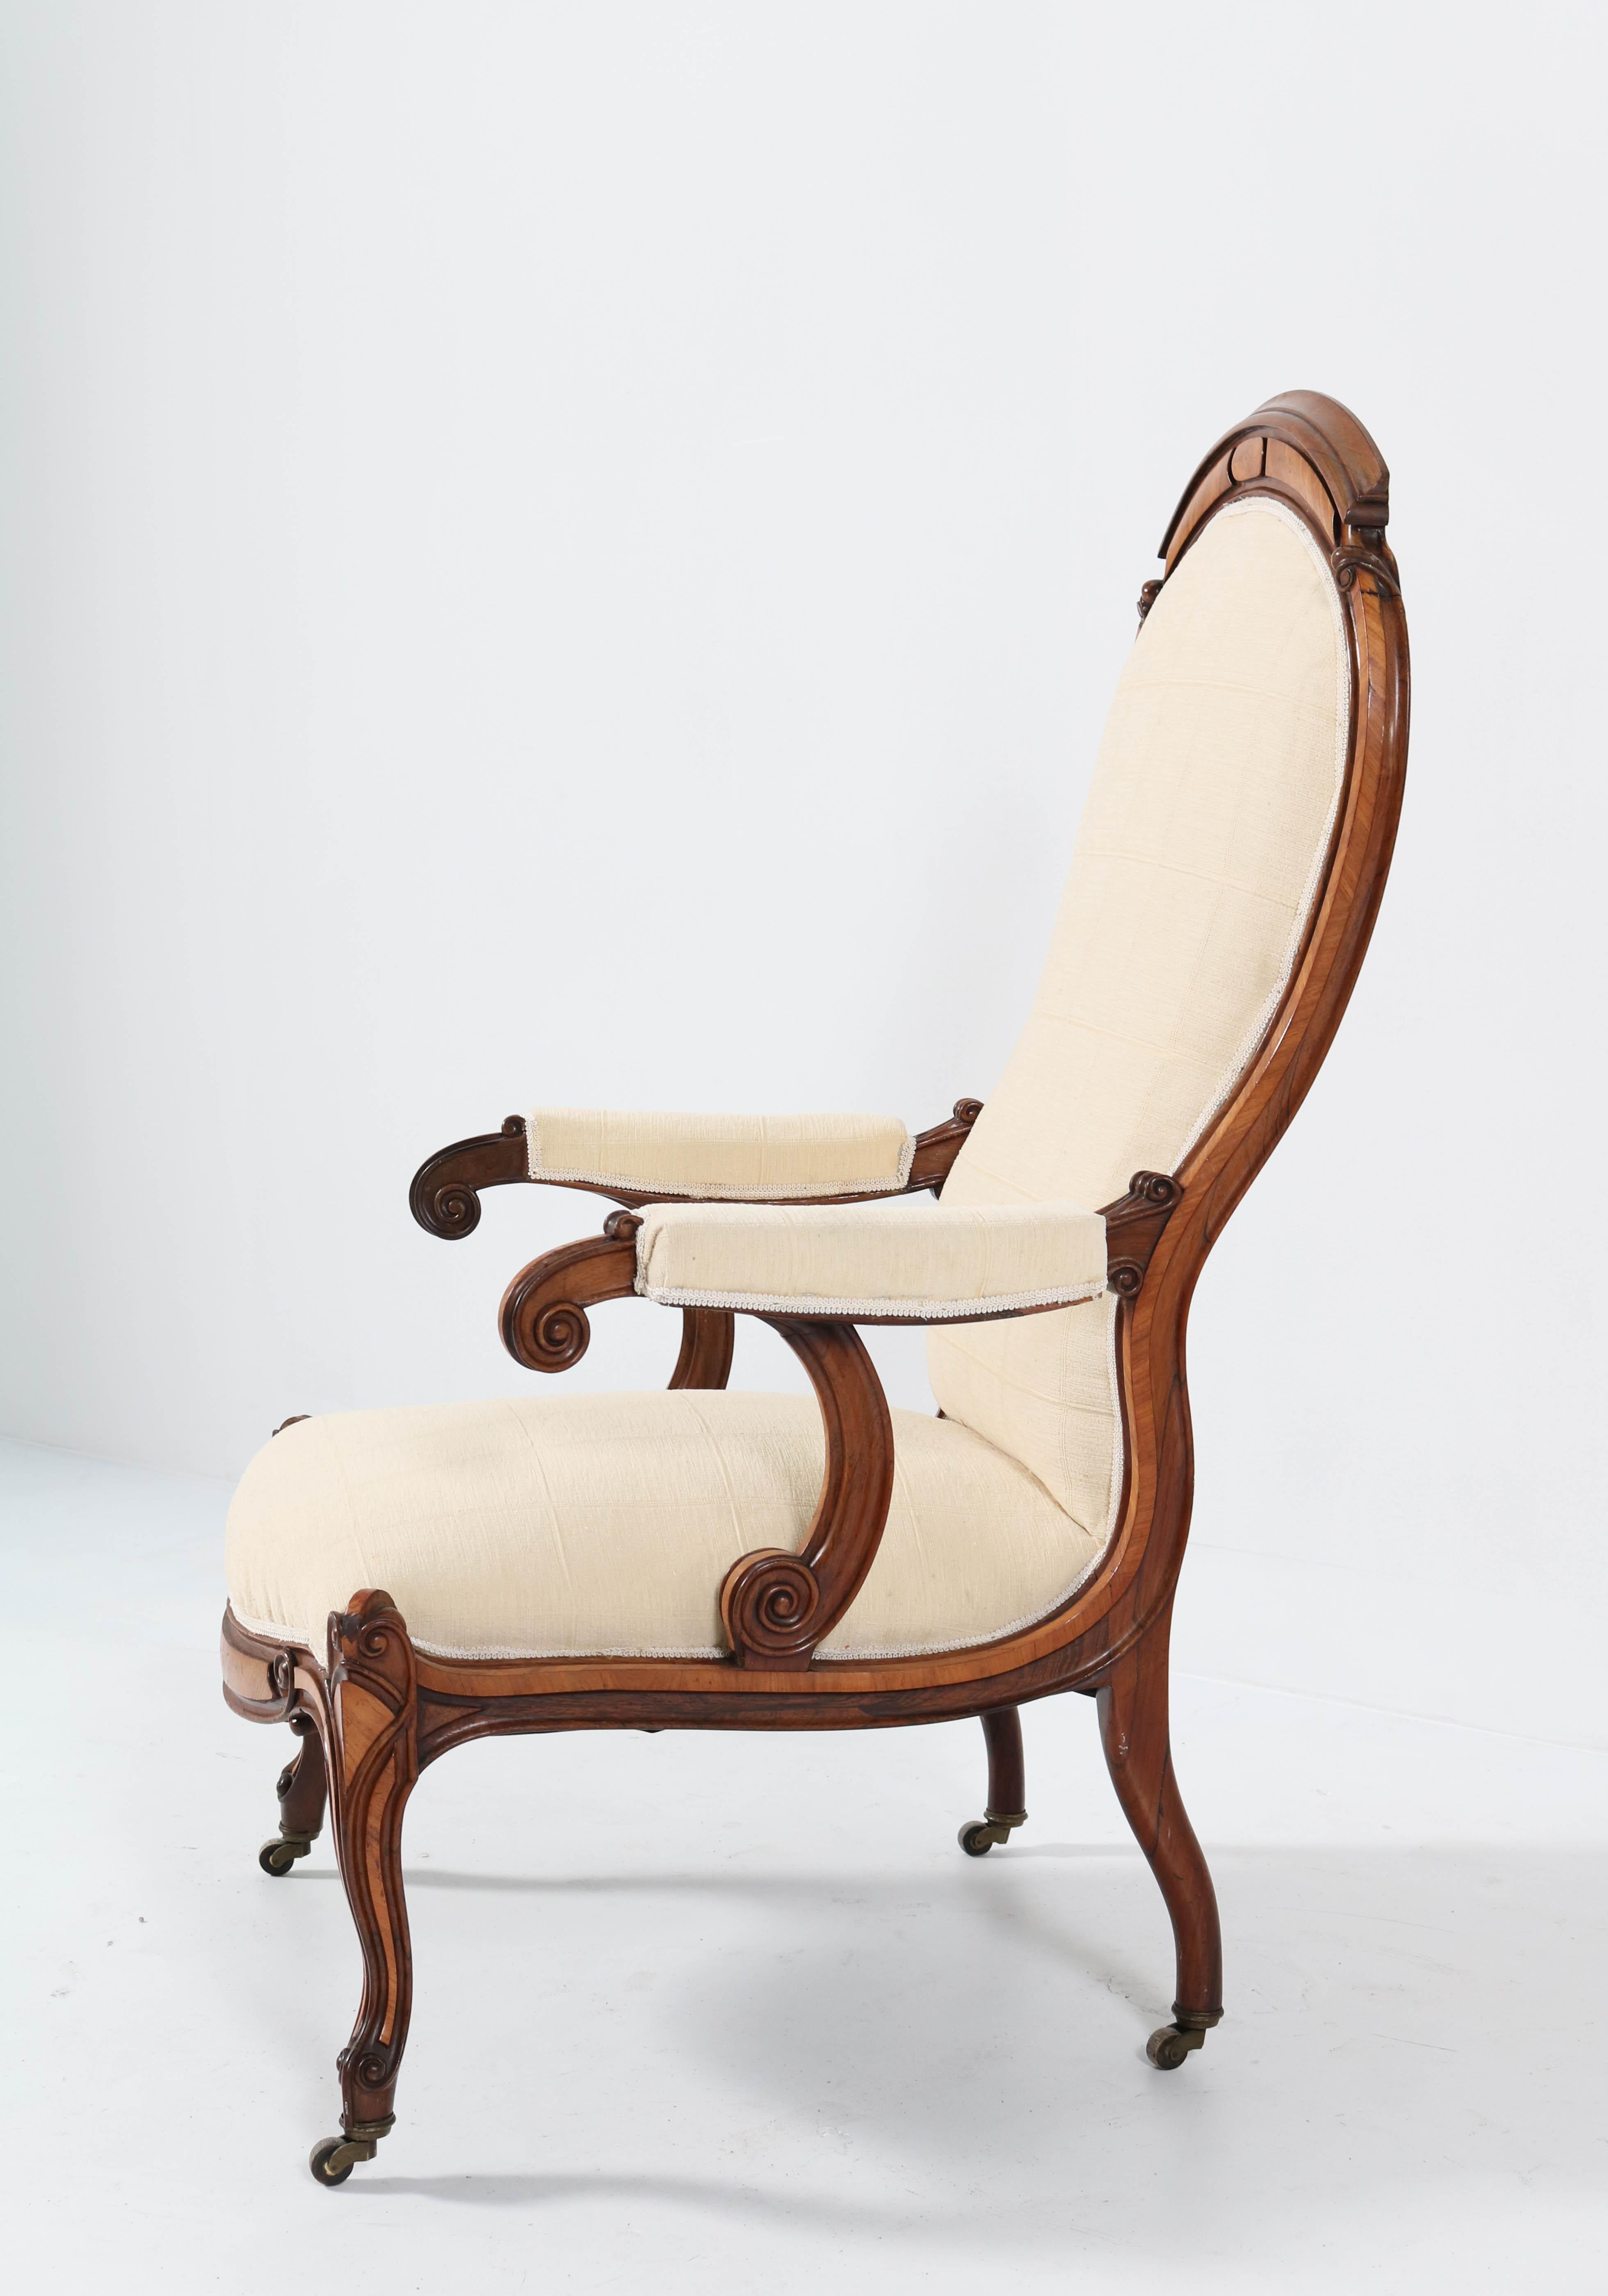 Dutch Satinwood Victorian High Back Armchair or Voltaire Chair, 1860s For Sale